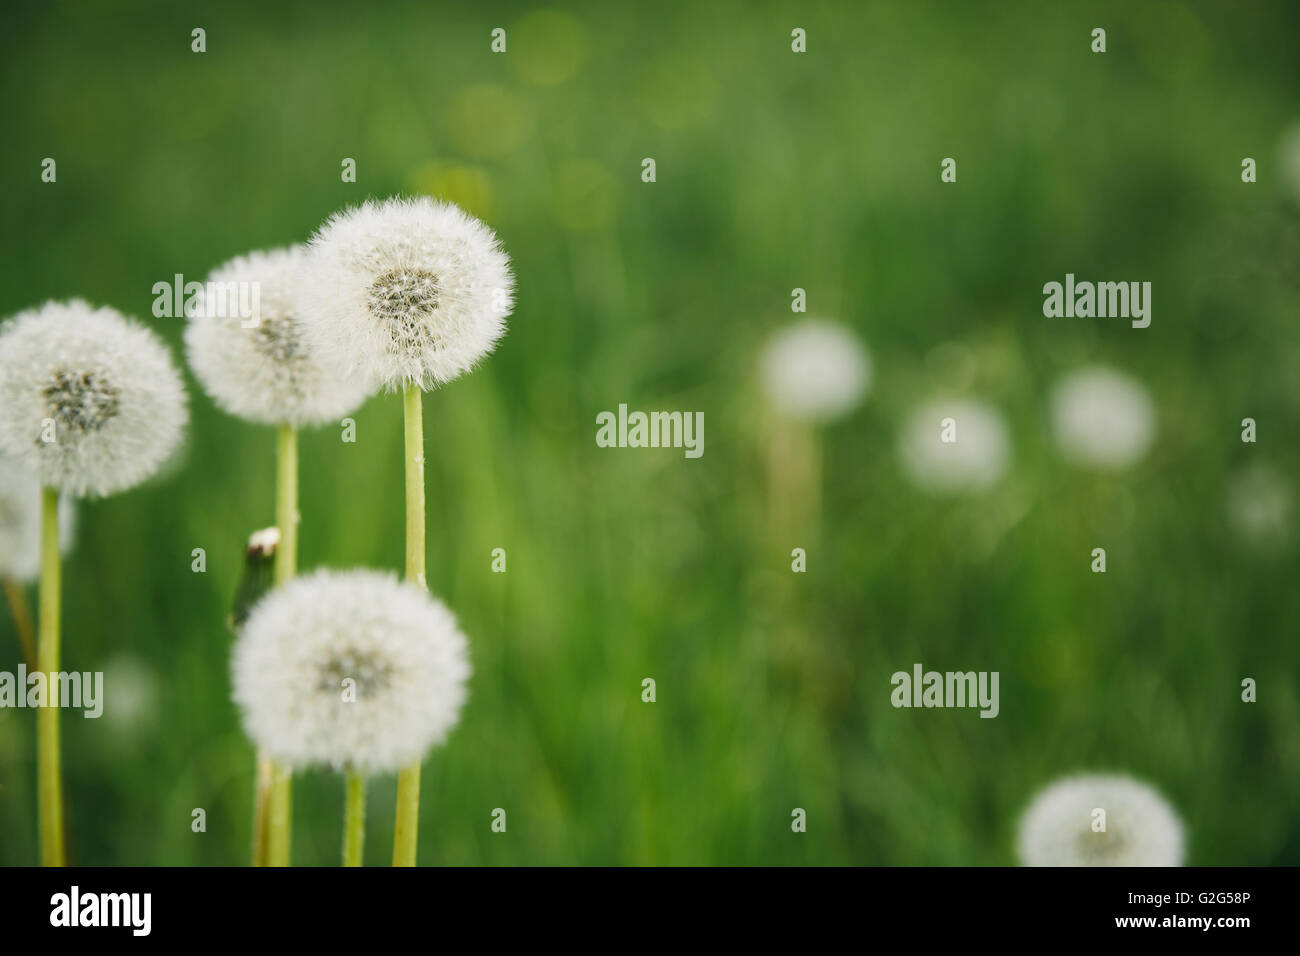 Beutiful summer background with dandelions Stock Photo